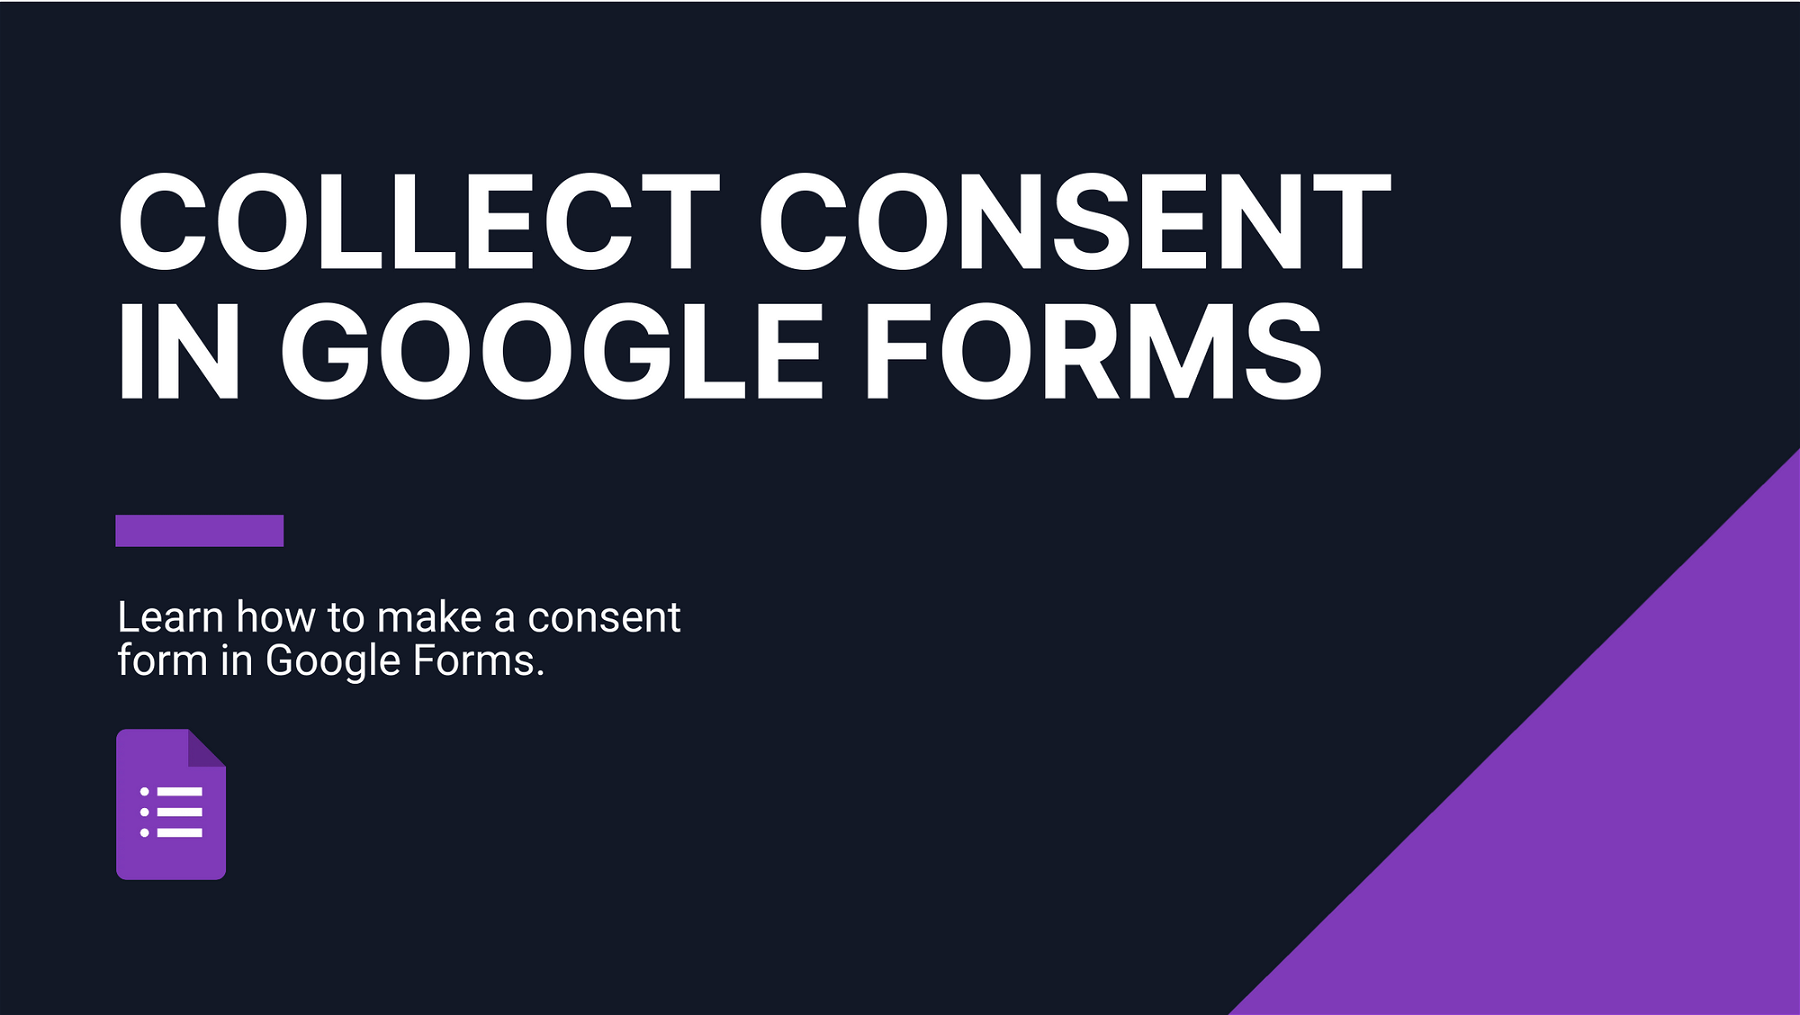 How to Make a Consent Form on Google Forms: A Step-By-Step Guide